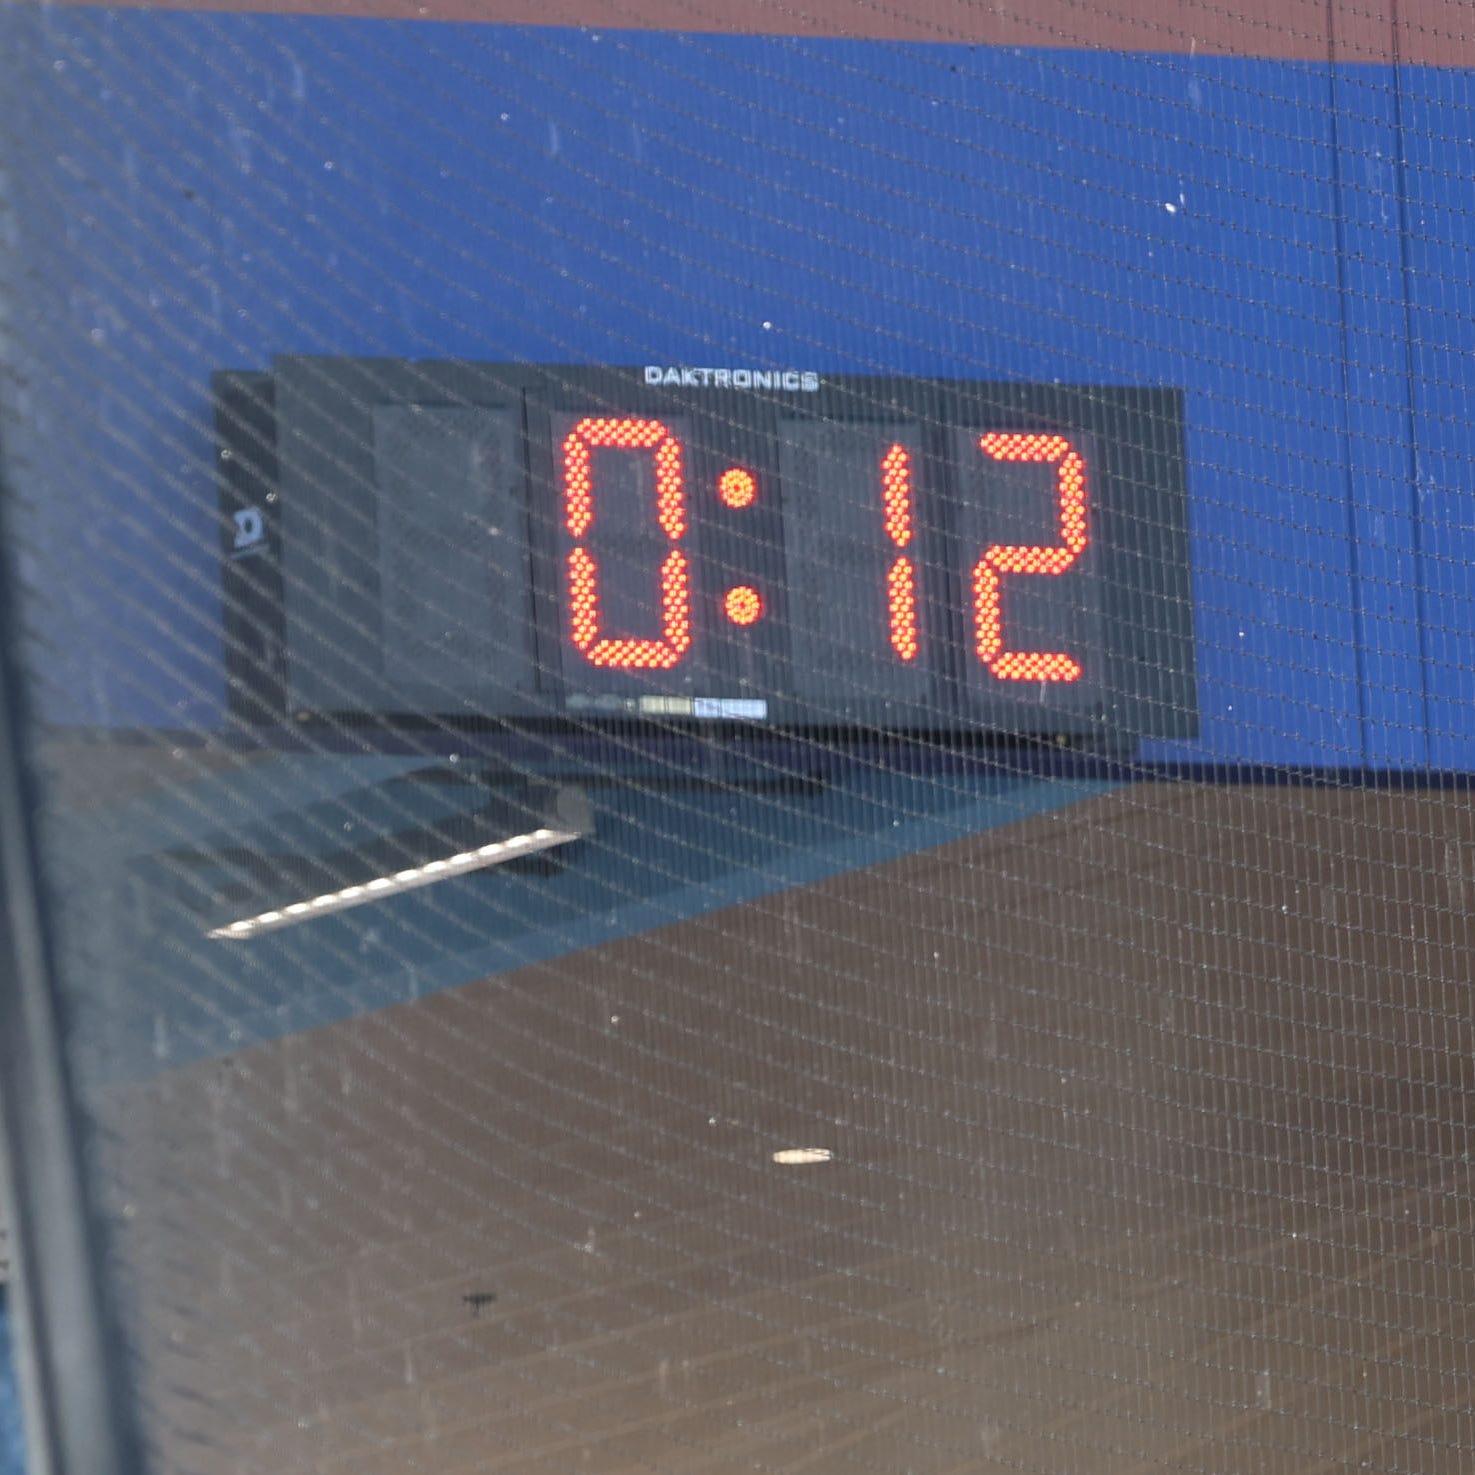 A view of the pitch clock during Saturday's game between the Braves and Red Sox.